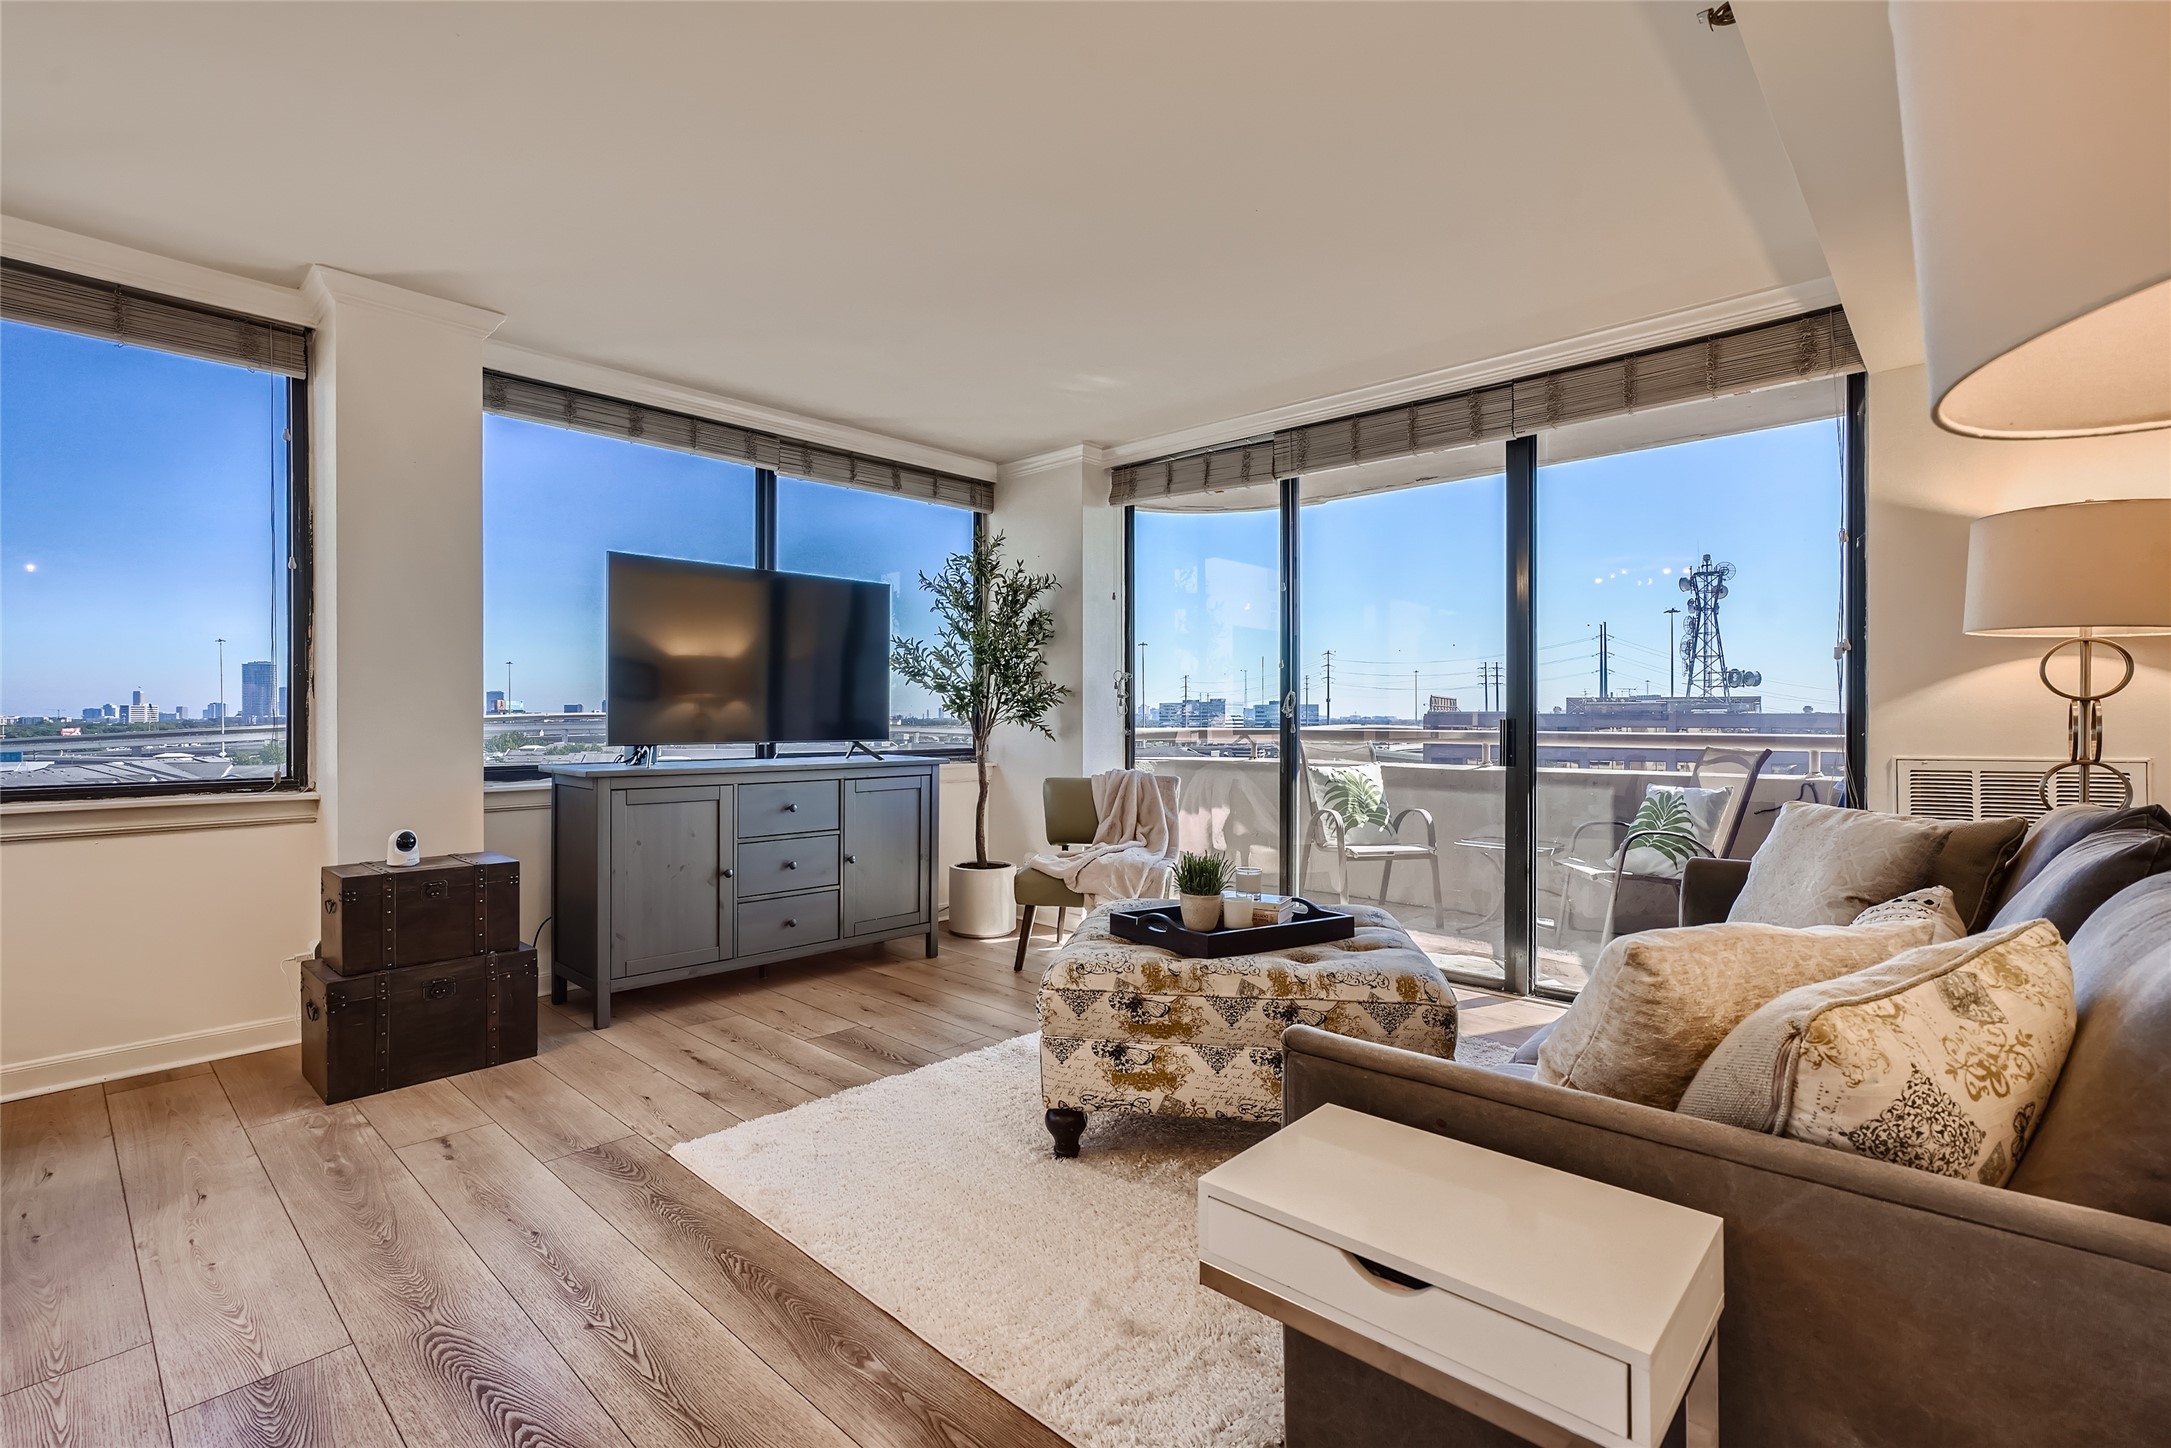 Experience outdoor views from the living room's sliding glass doors that open to the balcony.